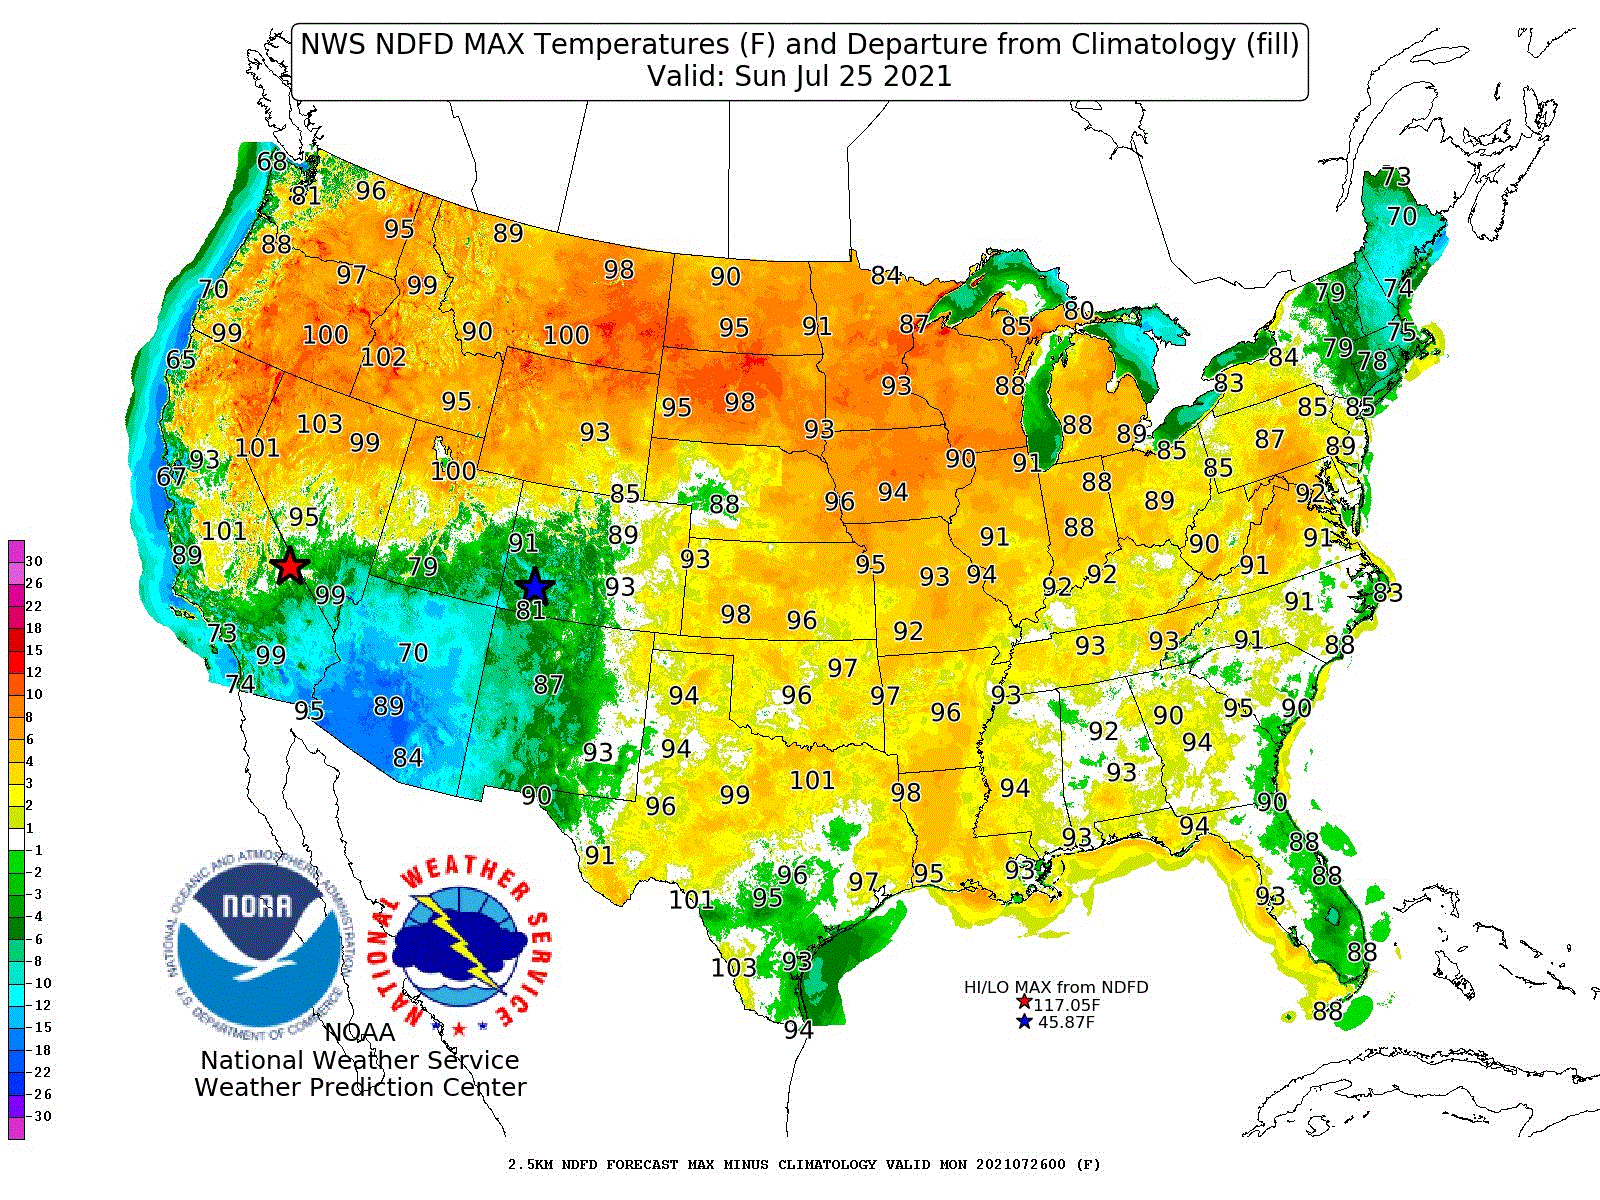 Forecast NWS NDFD Max temperatures (F) and departure from climatology (fill) in the United States, 25 July 2021 - 28 July 2021. Graphic: NOAA / NWS